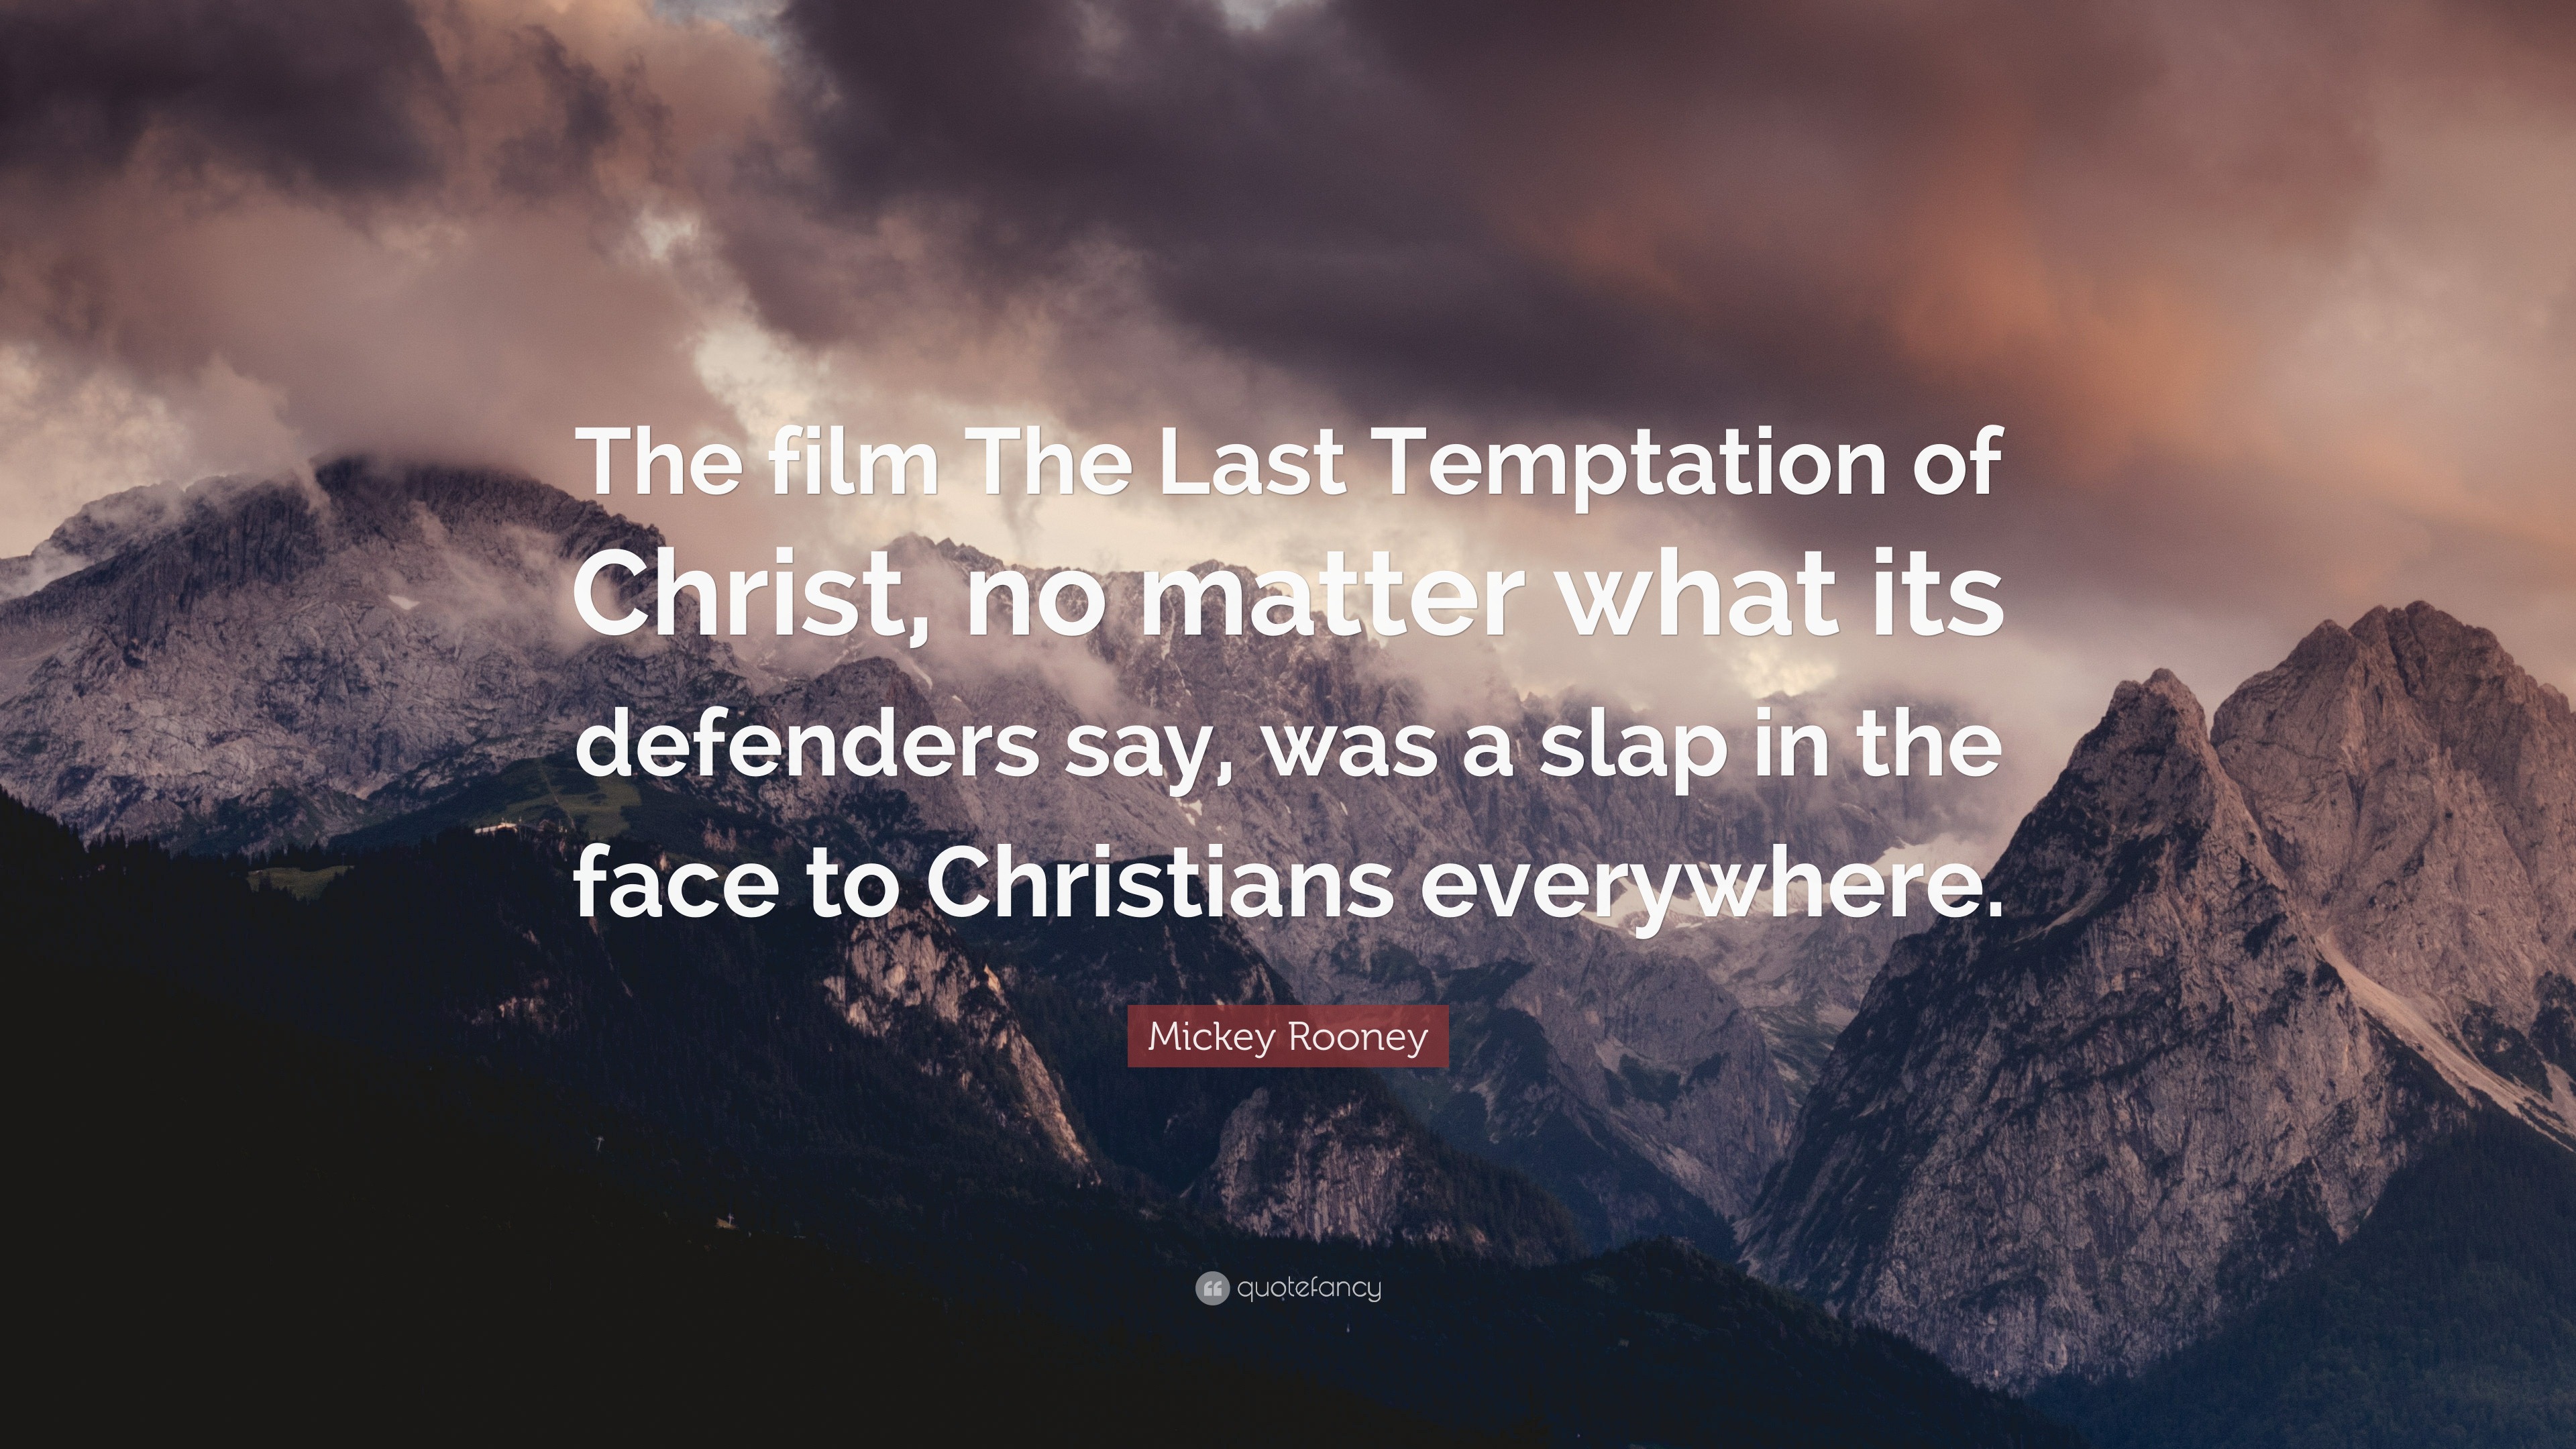 Mickey Rooney Quote: “The film The Last Temptation of Christ, no matter ...